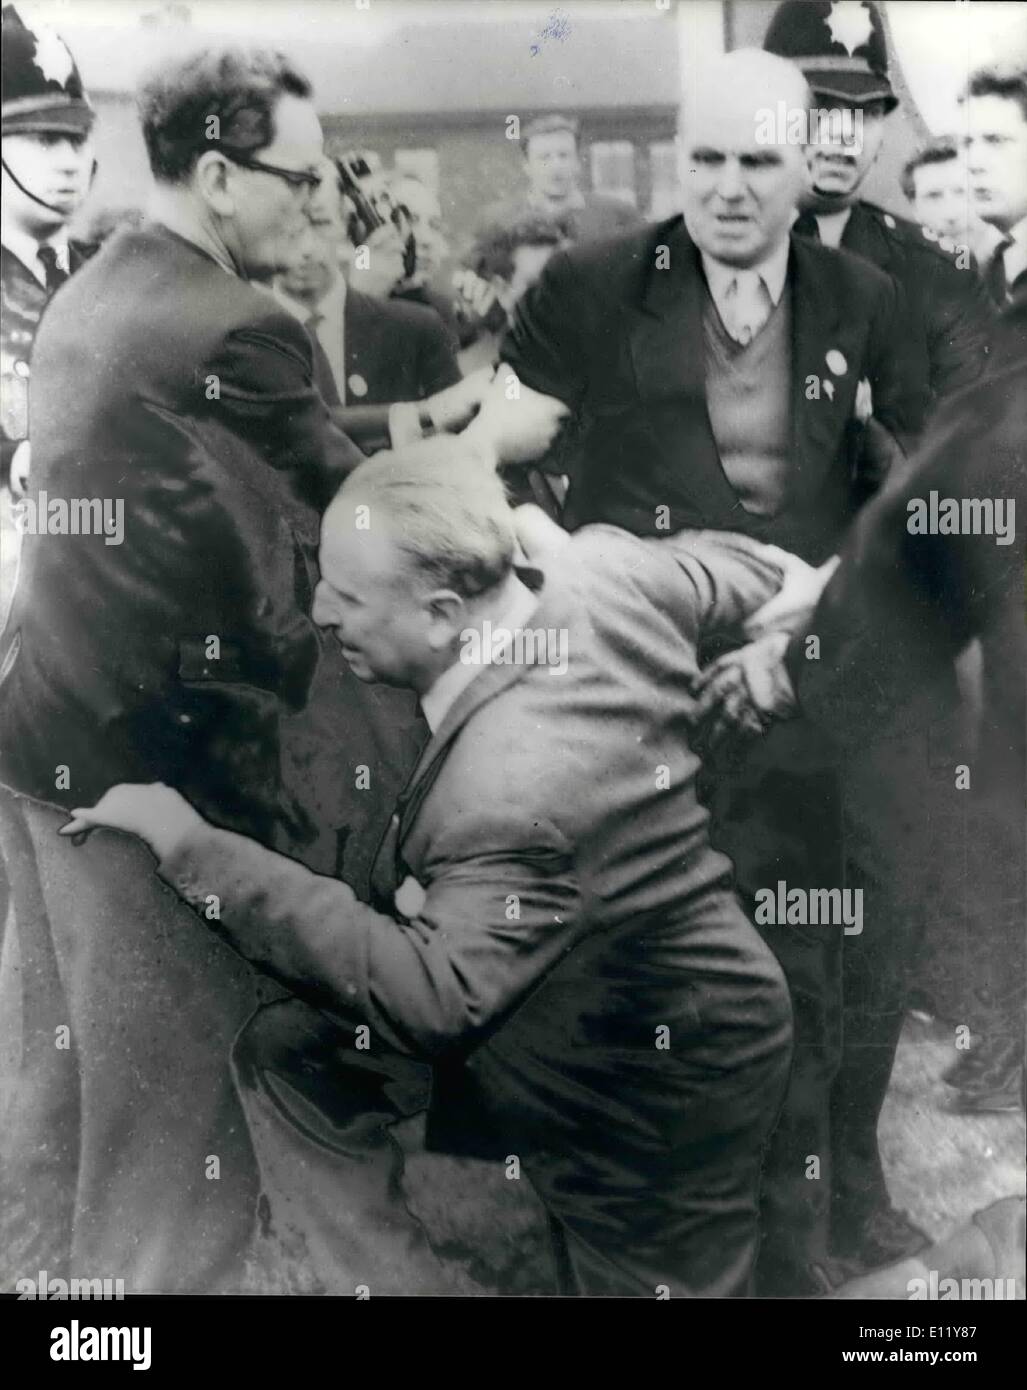 Dec. 12, 1980 - Sir Oswald Mosley dies in Paris: Sir Oswald Mosley, the one time leader of the Britain Fascist Movement, died early today in Paris at the age of 84. Photo shows Sir Oswald Mosley being mauled by crowds during a rally in Manchester in 1962. Stock Photo